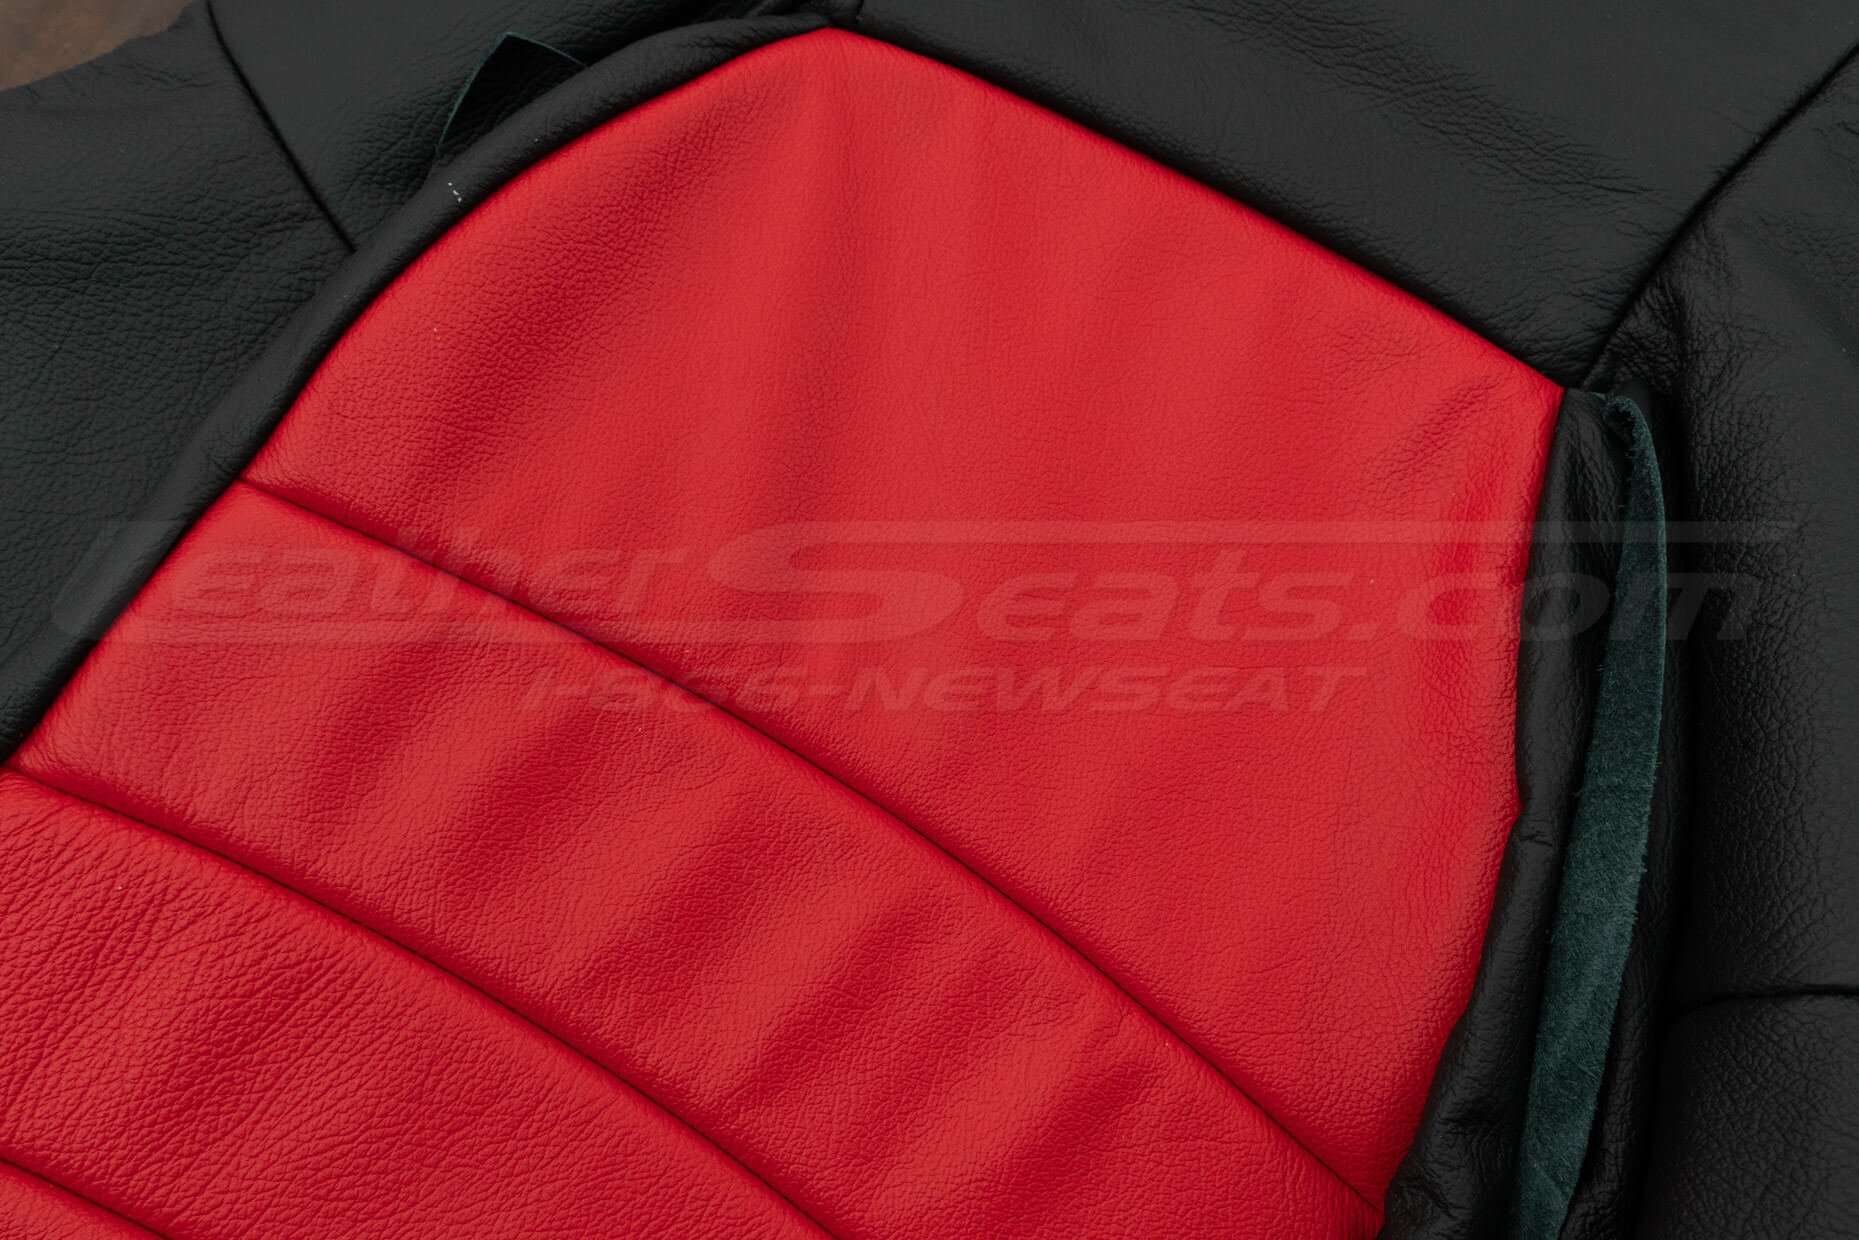 Bright Red leather texture for Honda S2000 leather kit